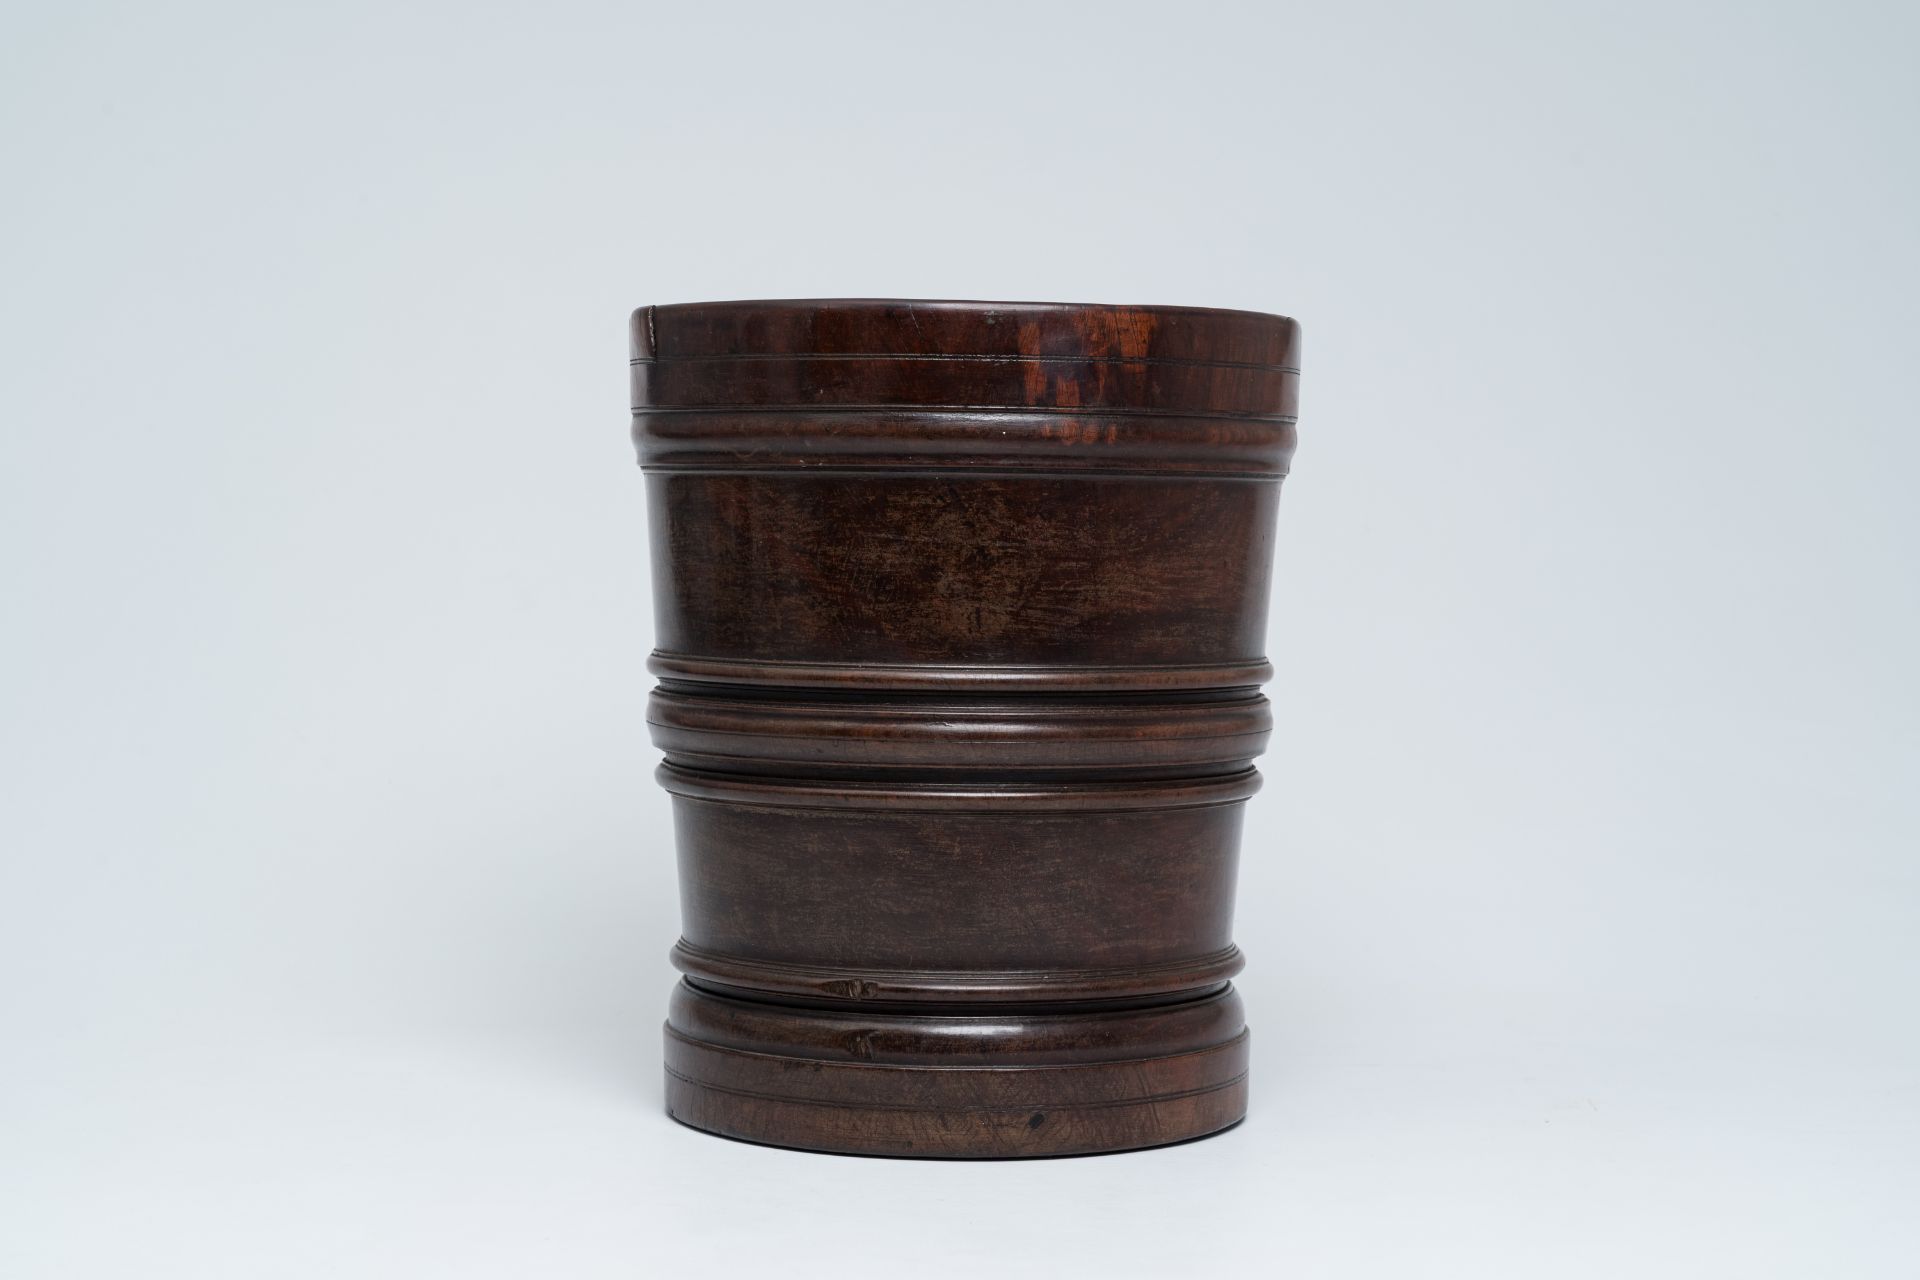 A large English turned wood mortar and pestle, second half 17th C. - Image 5 of 12